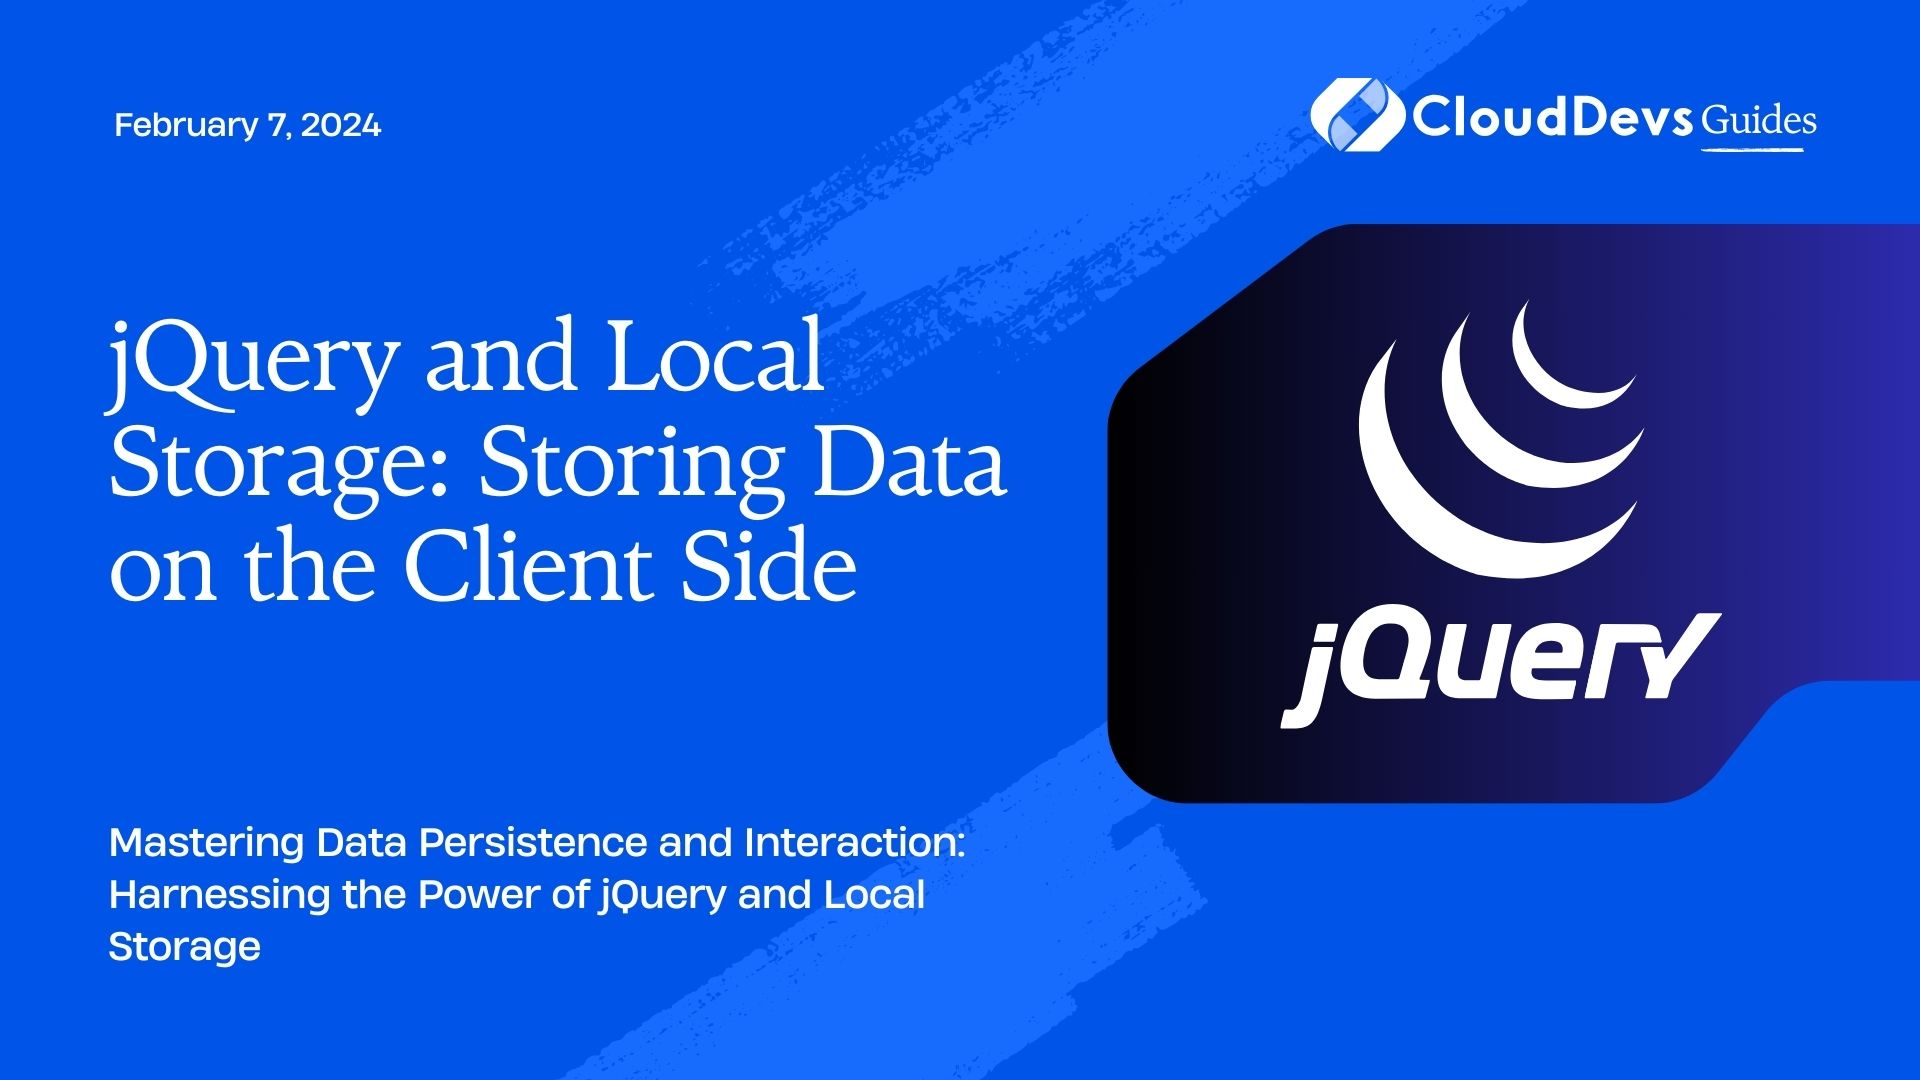 jQuery and Local Storage: Storing Data on the Client Side